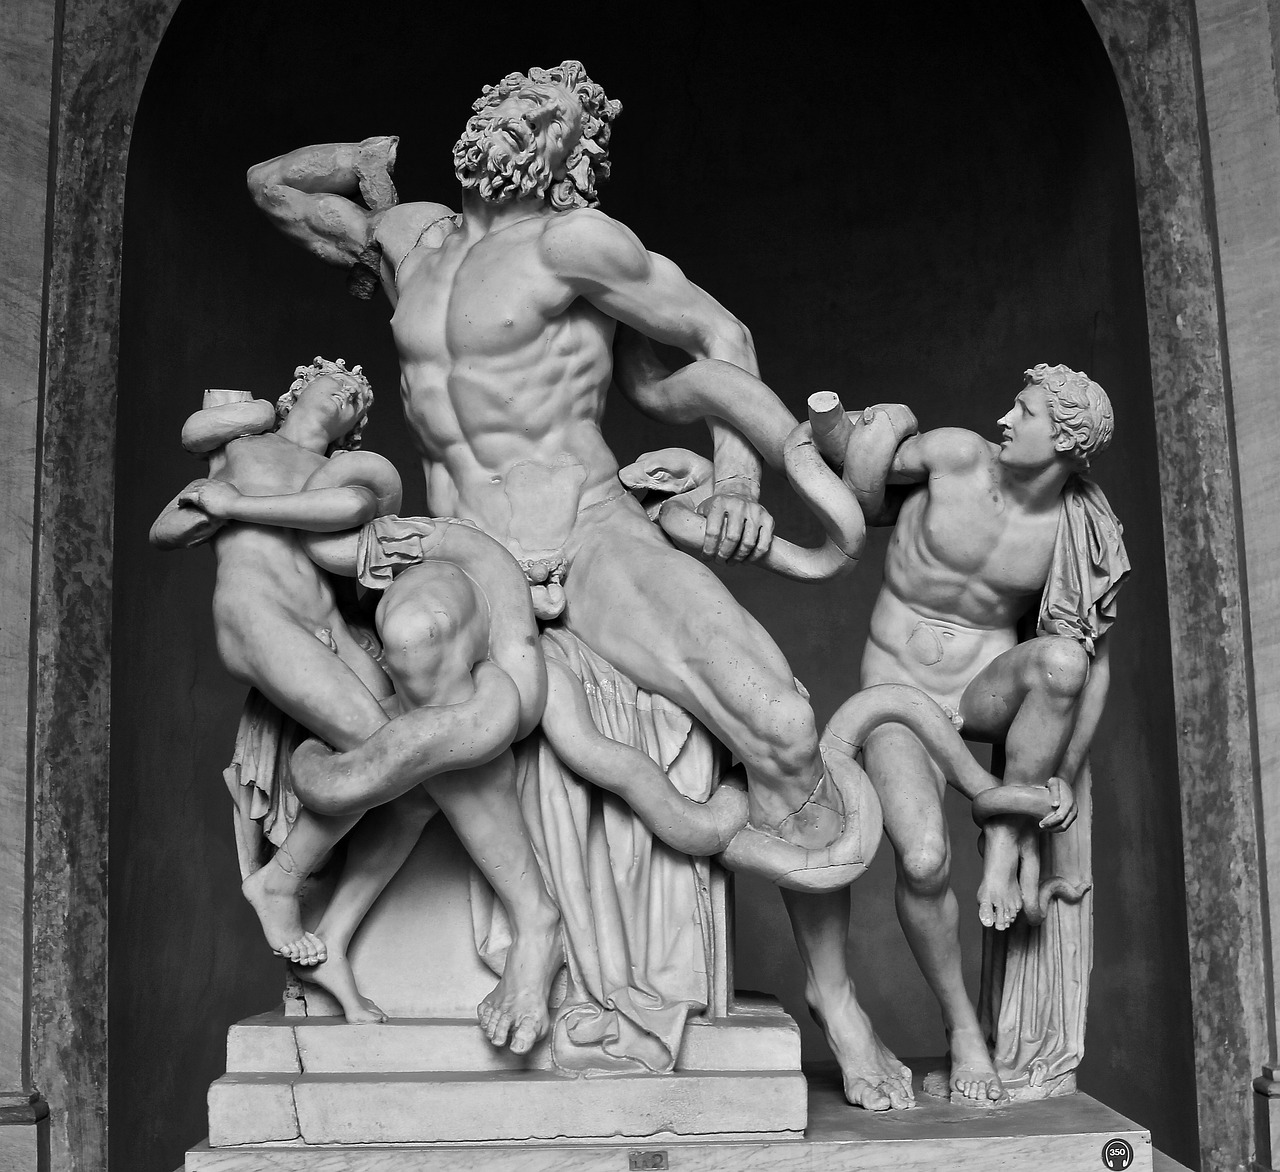 a black and white photo of a statue, inspired by Michaelangelo, shutterstock, the great door of hell, giants, bumps, versace